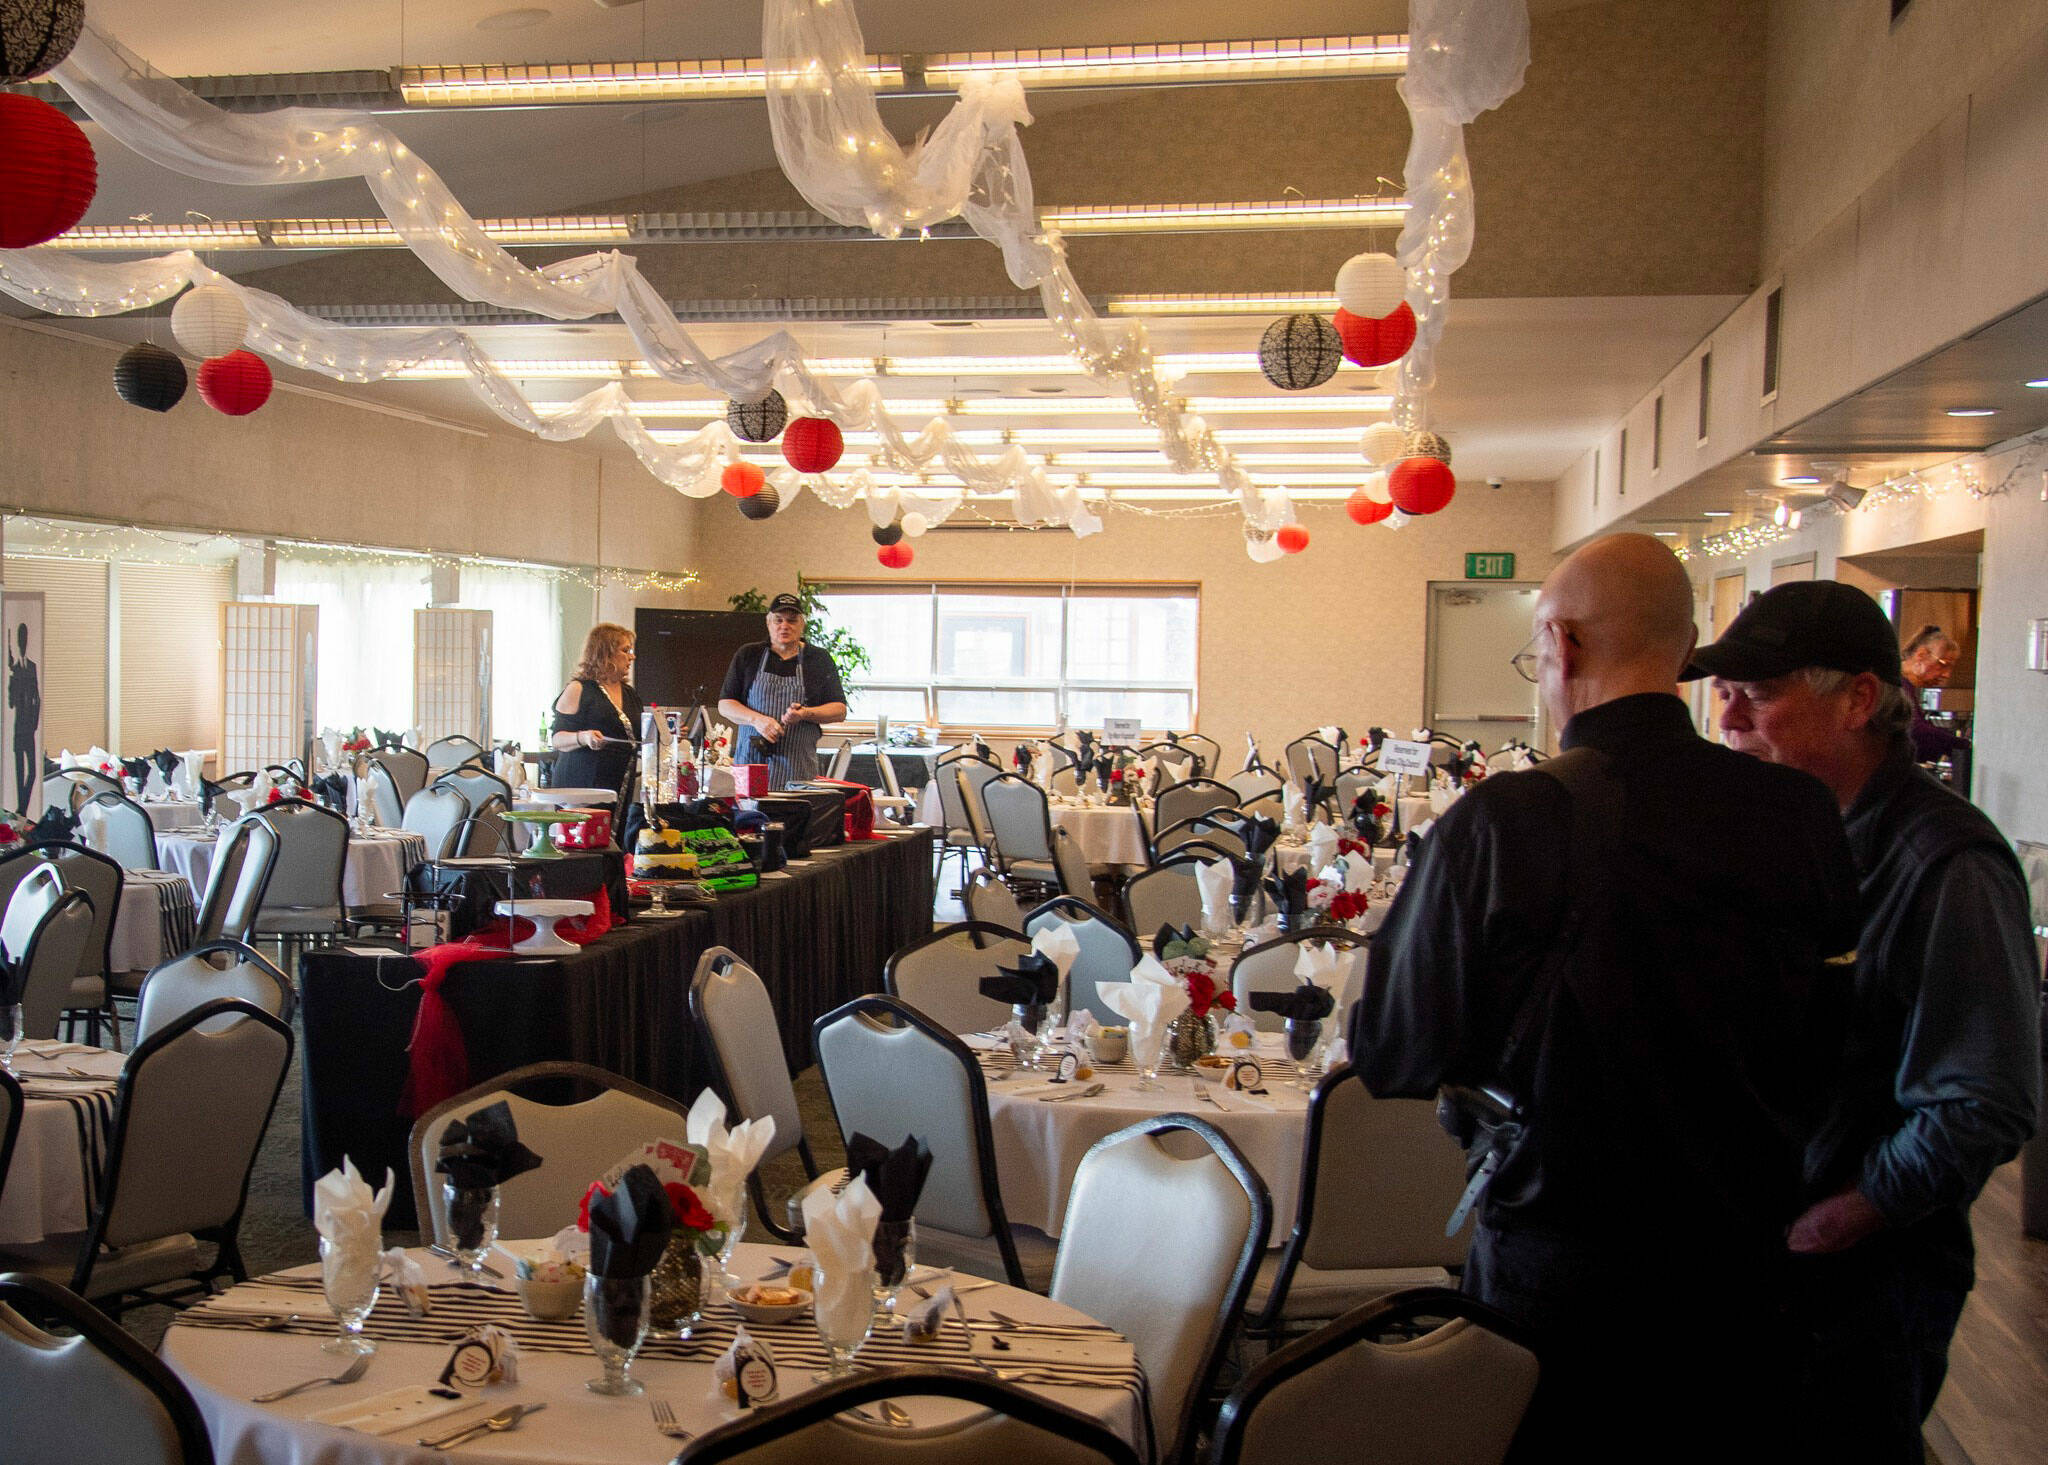 The Kenai Senior Center’s dining space is readied for the annual March for Meals fundraiser in Kenai, Alaska, on Friday, April 5, 2024. (Photo by Ken Aaron, provided by Kenai Senior Center)